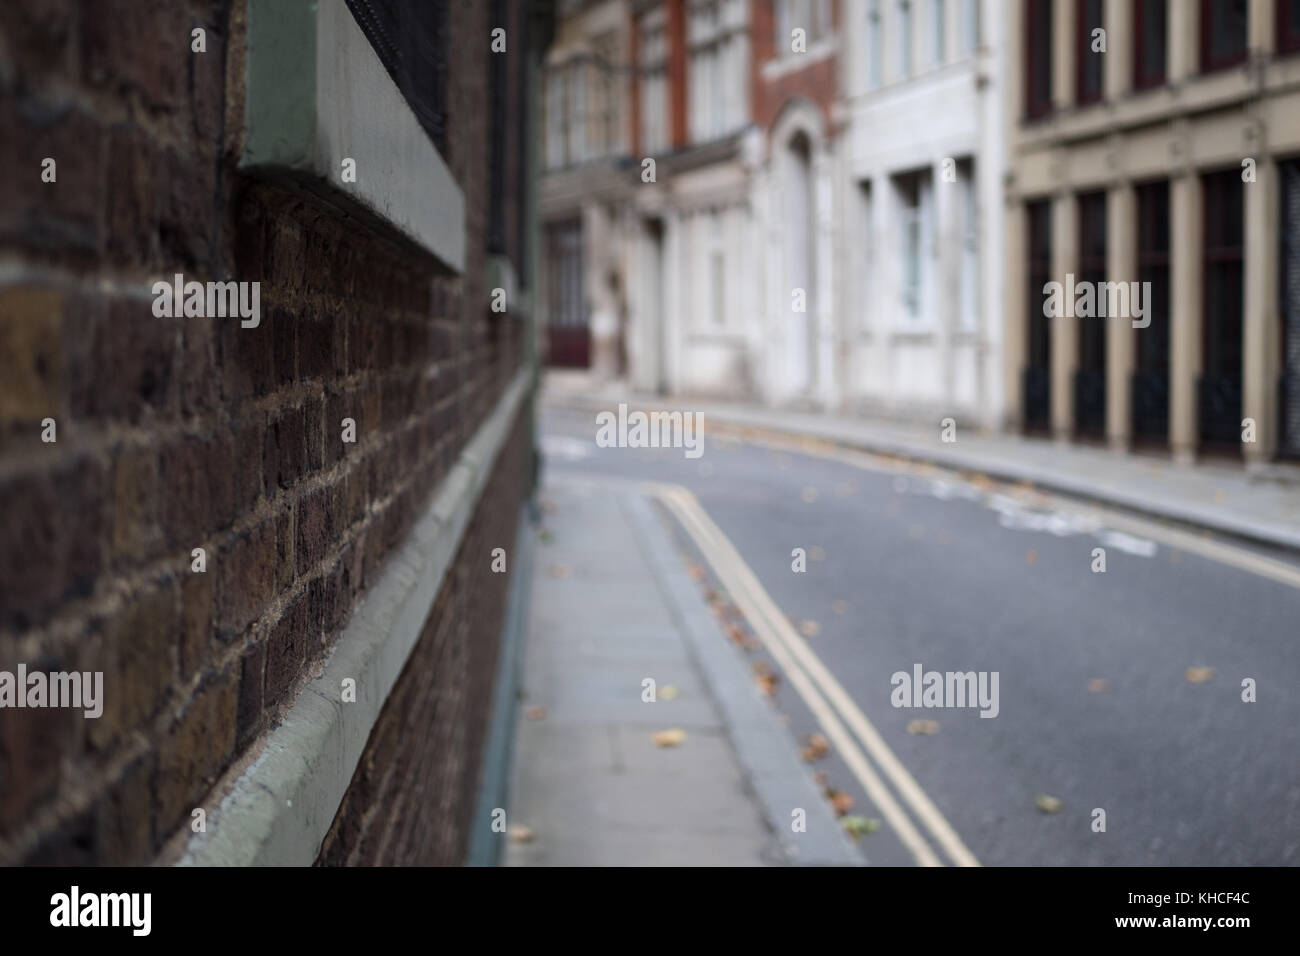 Looking onto an empty back street in London. Camera is pushed against the wall for a subjective view. Stock Photo